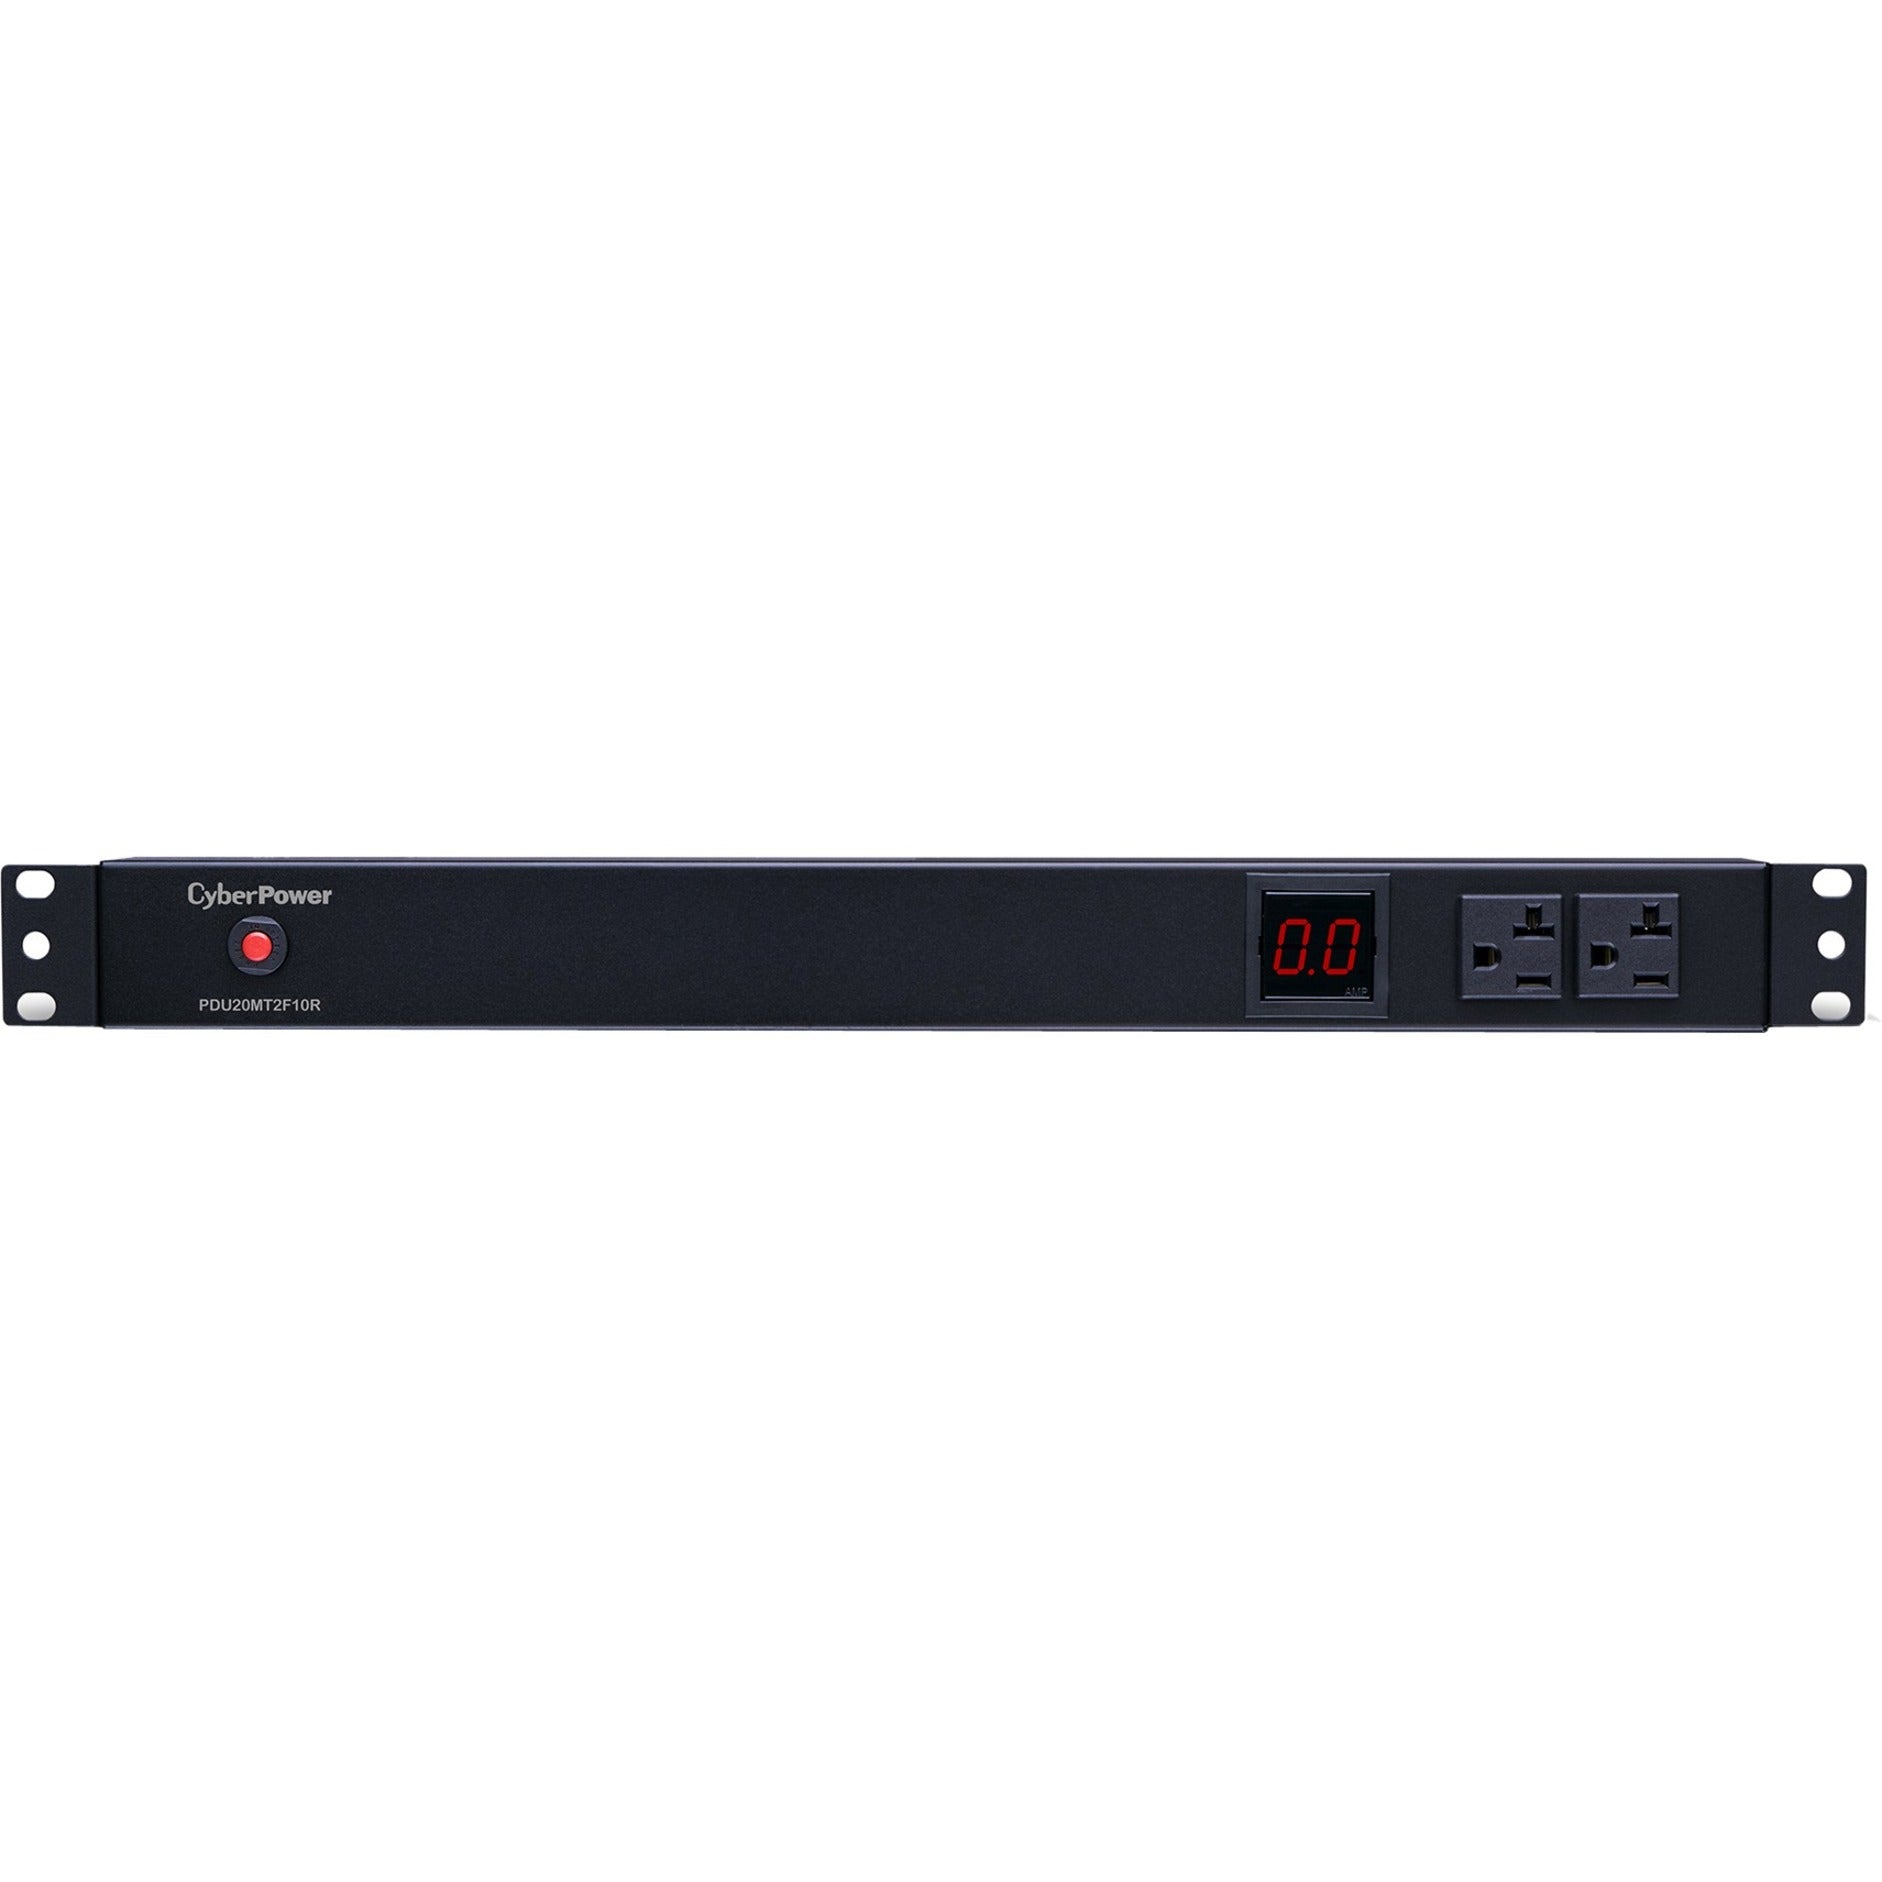 CyberPower PDU20MT2F10R Metered PDU, 12-Outlets, 20A, 120V AC, Rack-mountable